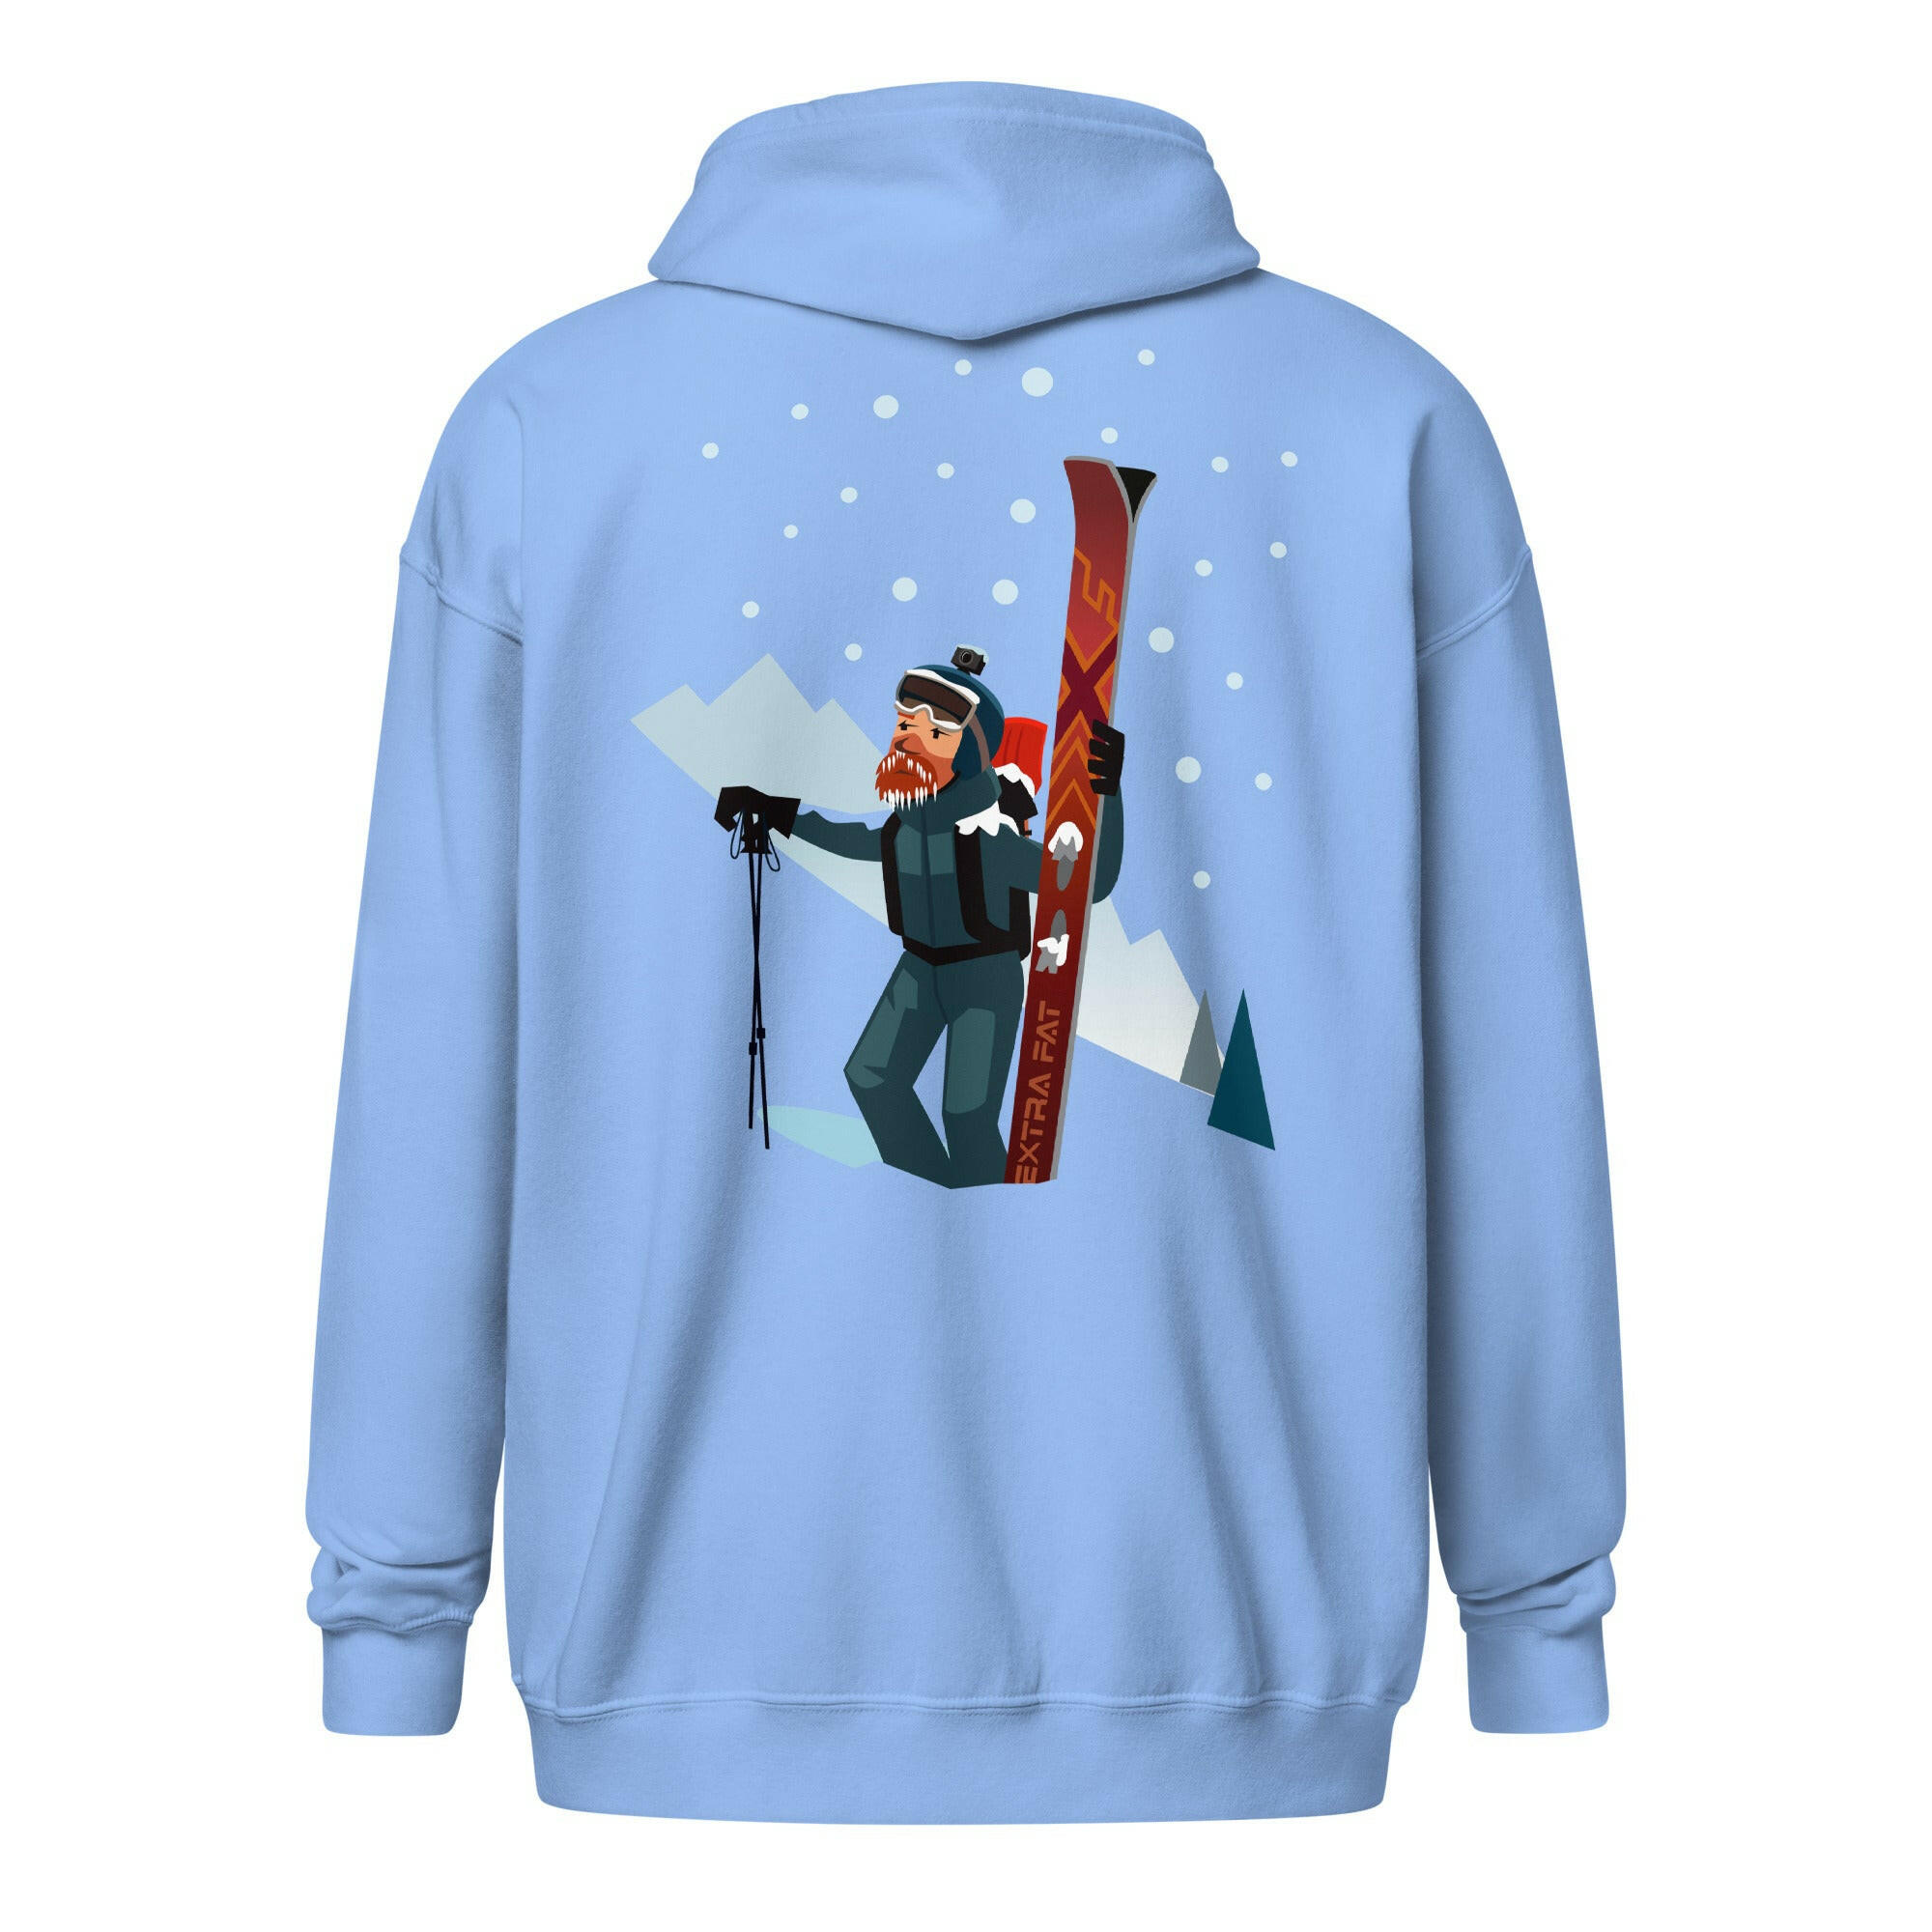 Unisex heavy blend zip hoodie Which skier are you? Freeride Skier on light colors (front & back)